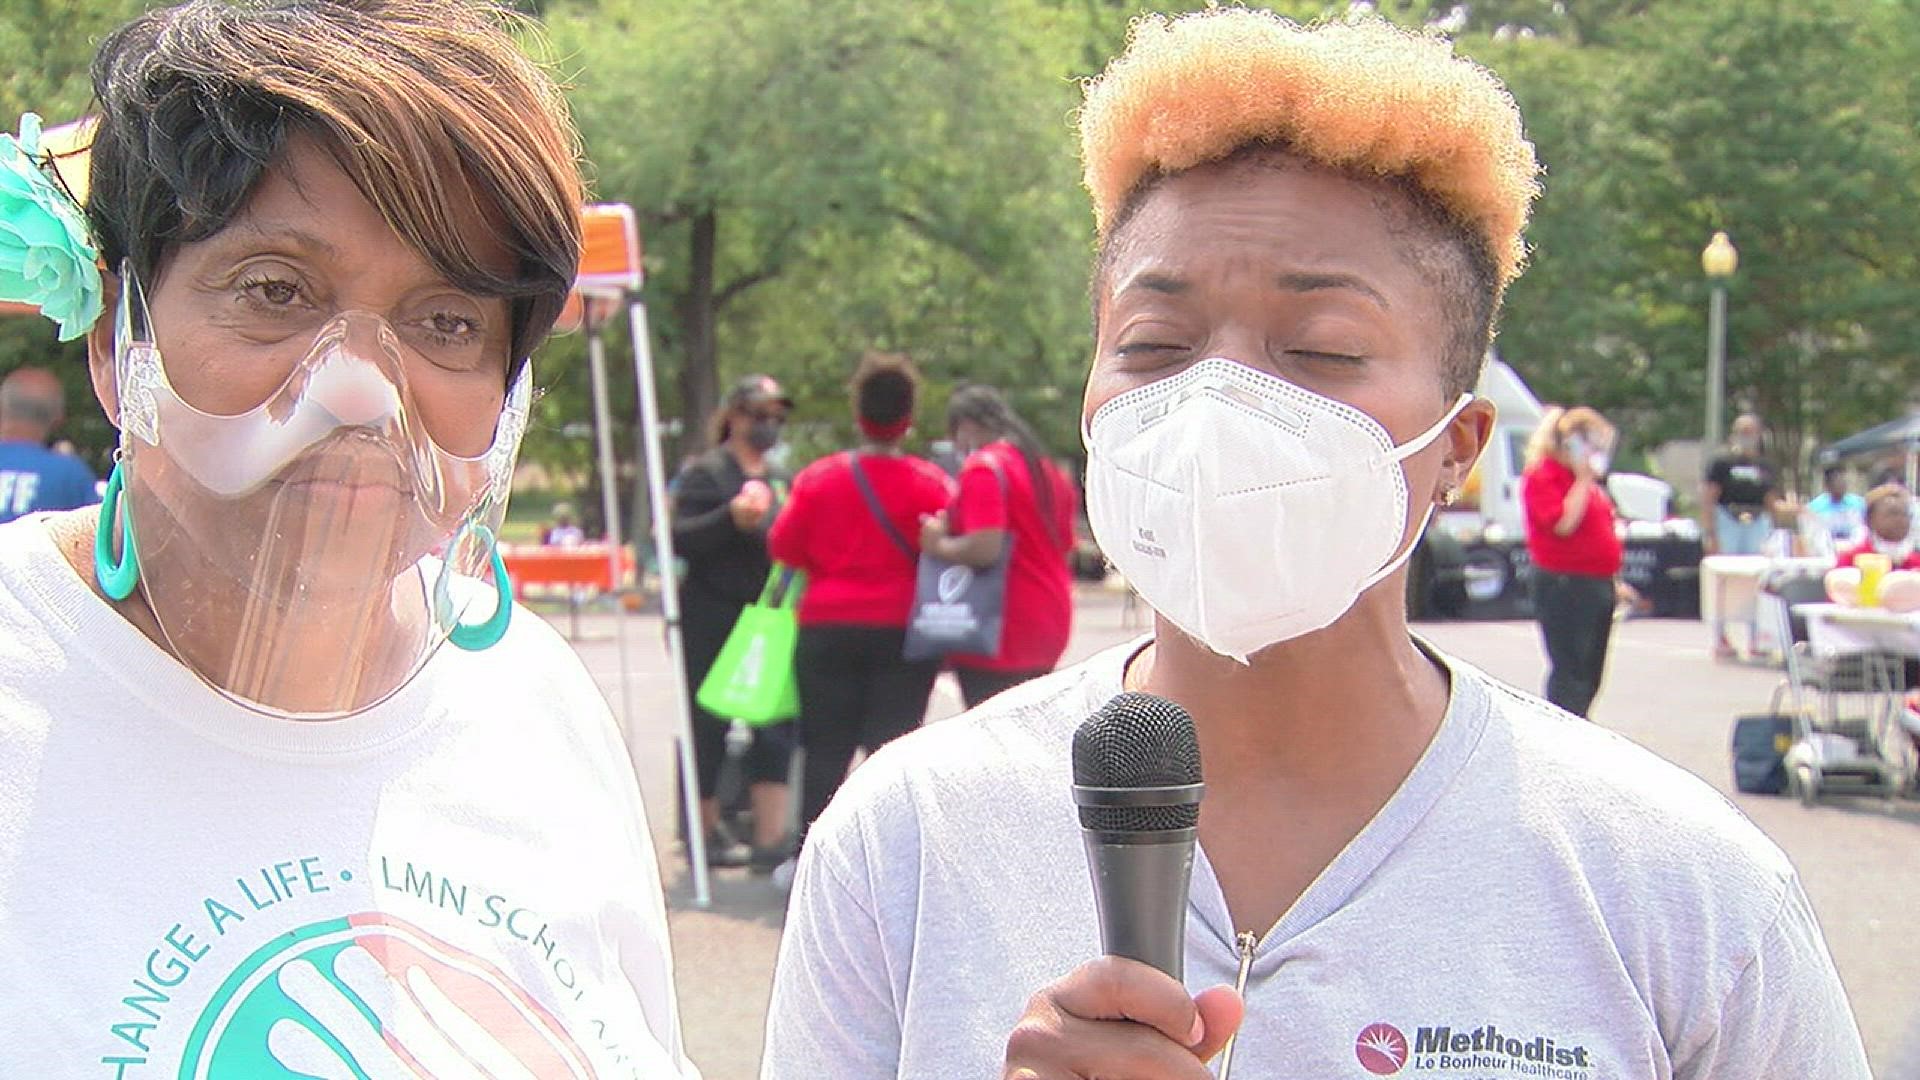 Representatives for Methodist Hospital were out in Orange Mound Saturday, helping folks get - and stay - healthy.